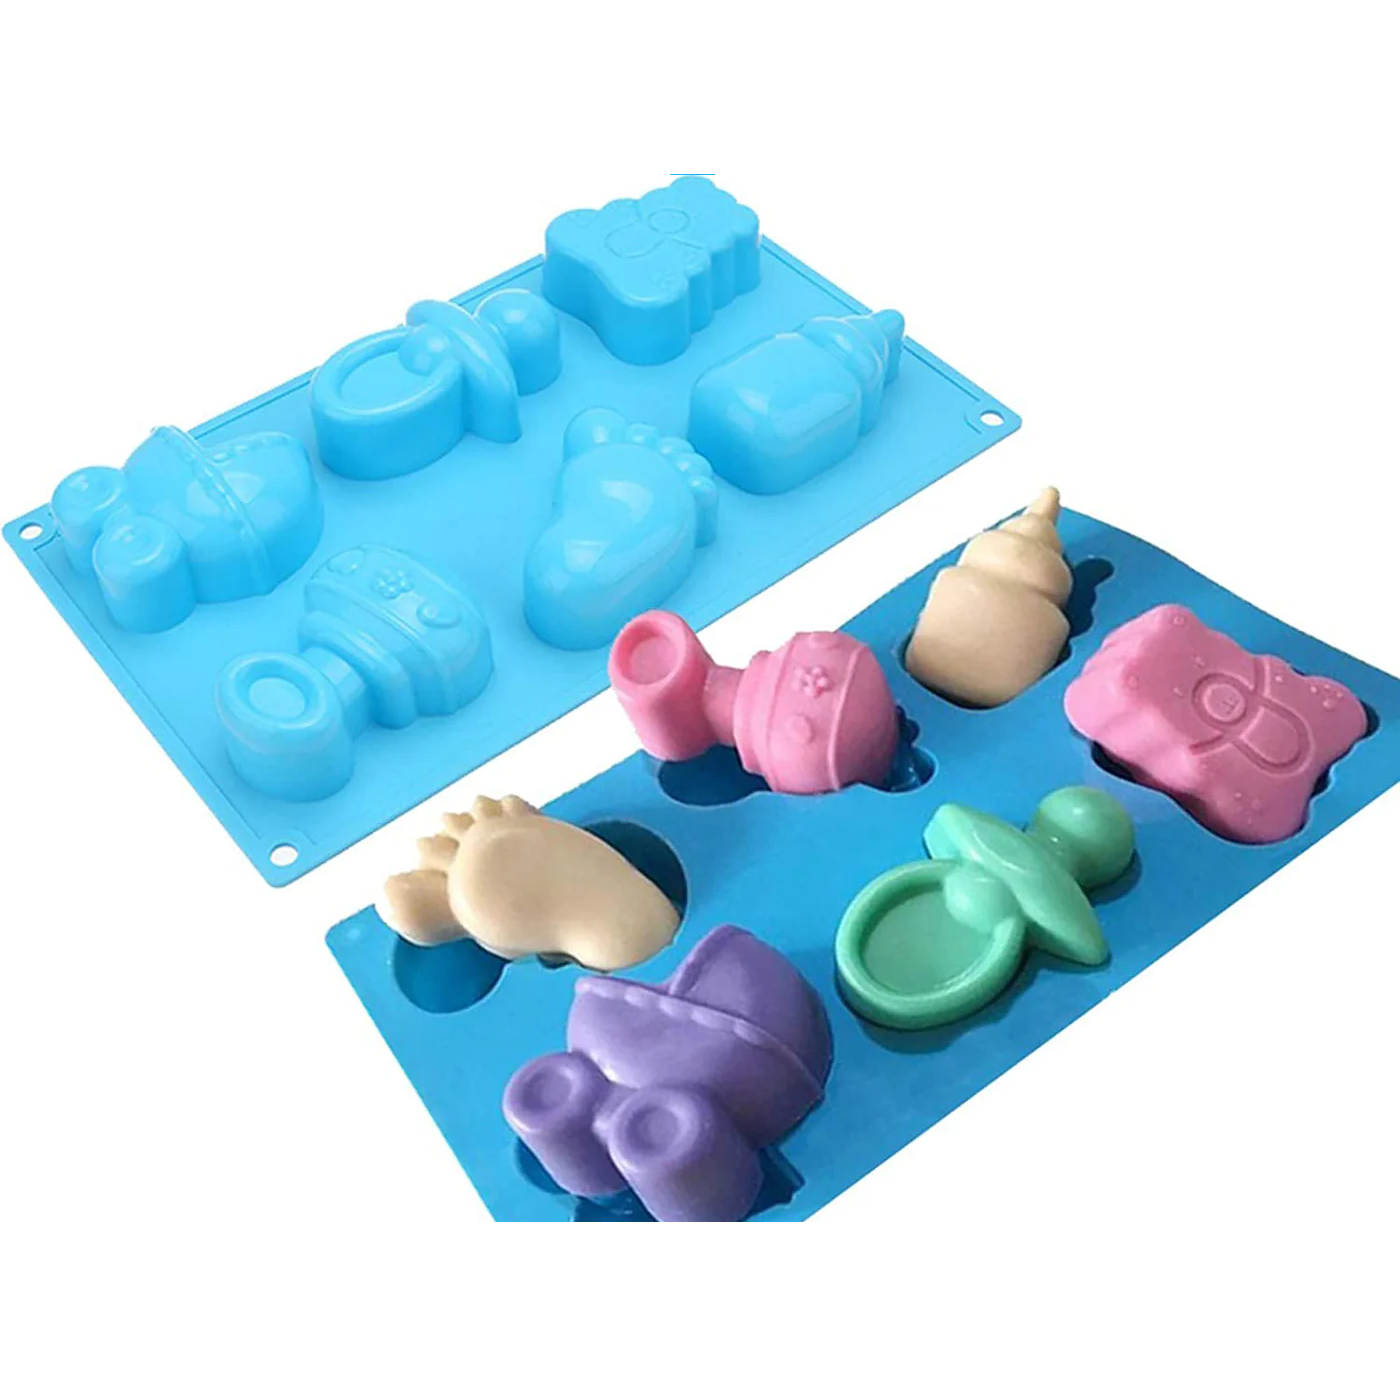 Silicone Baby Shower Mold 6 cavities - Lunaz Shop